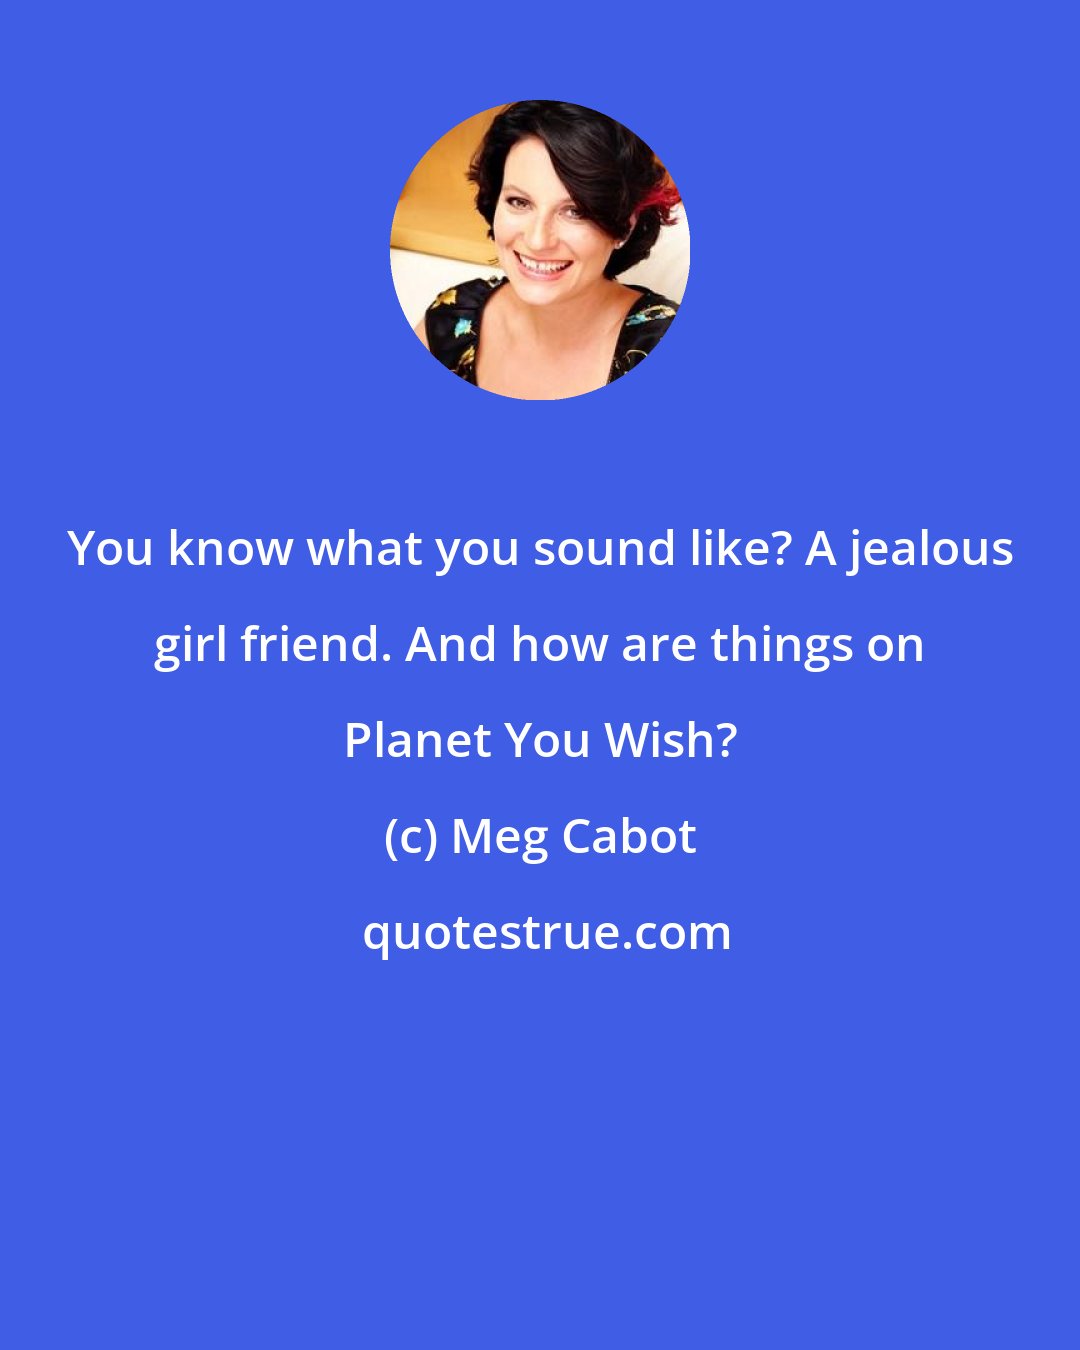 Meg Cabot: You know what you sound like? A jealous girl friend. And how are things on Planet You Wish?